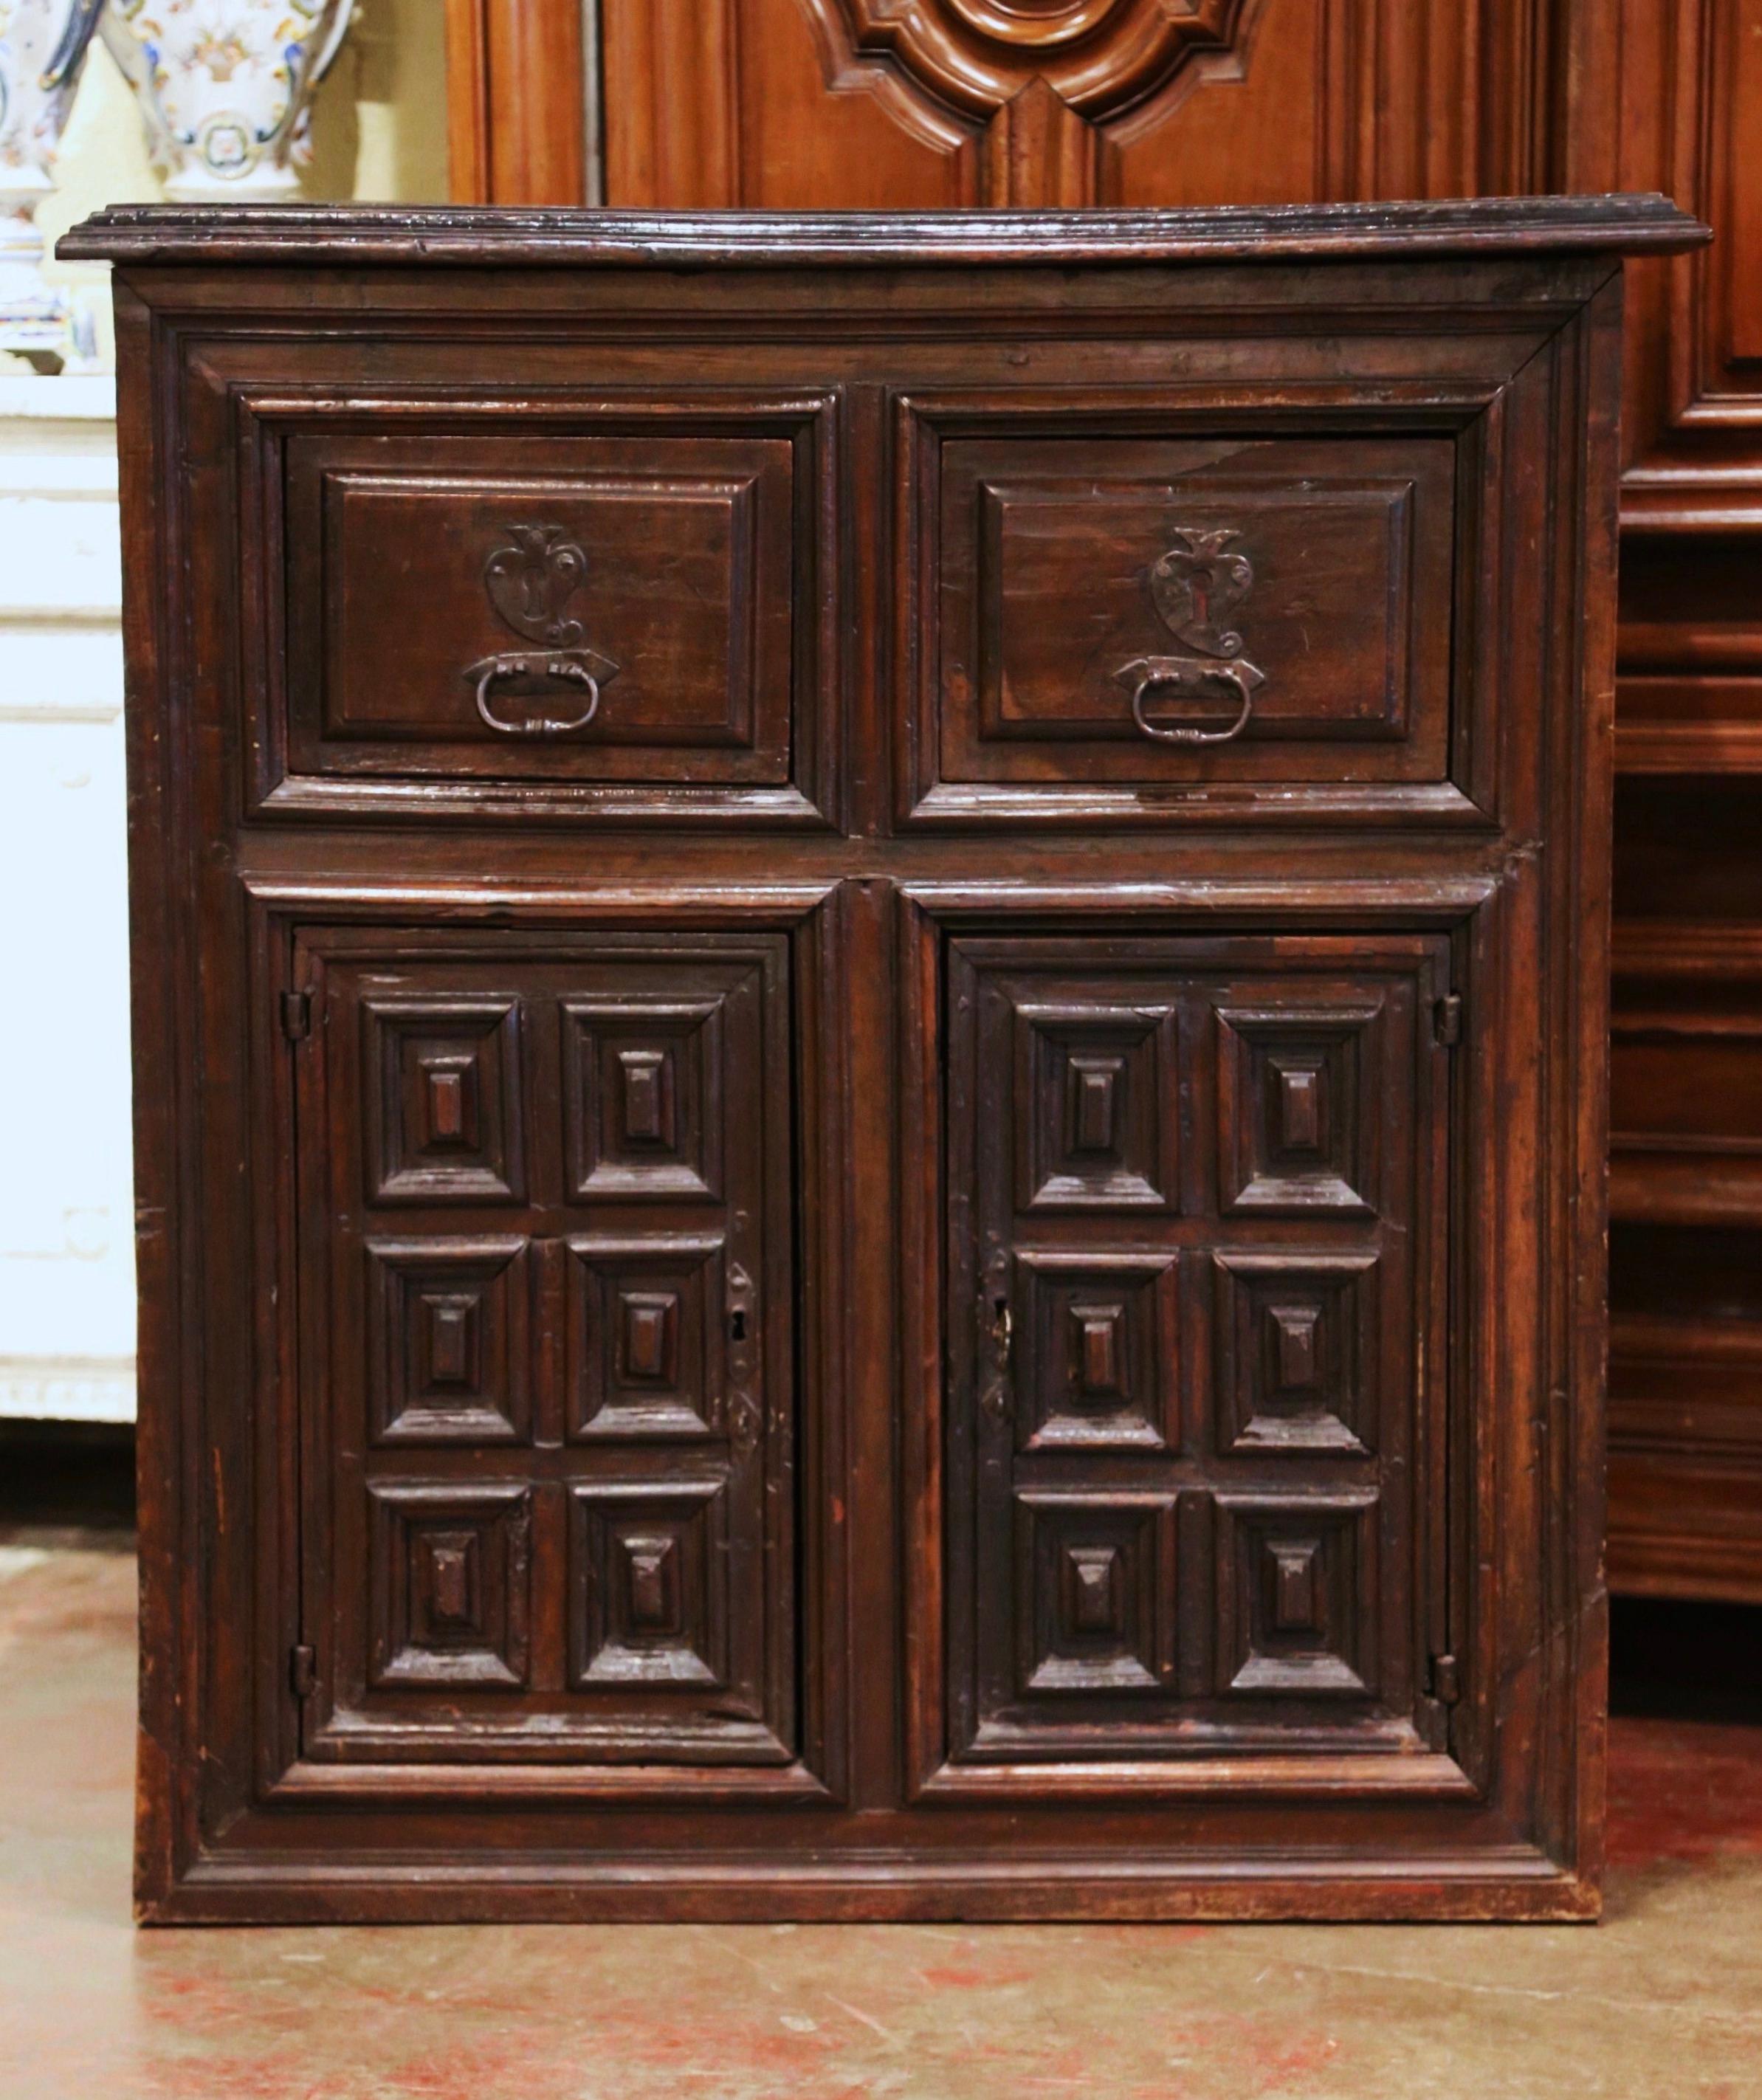 Hand carved in northern Spain circa 1700, the fruit wood cabinet features two drawers across the front dressed with the original forged pulls and escutcheons over two intricate hinged doors decorated with geometric square raised panels on both